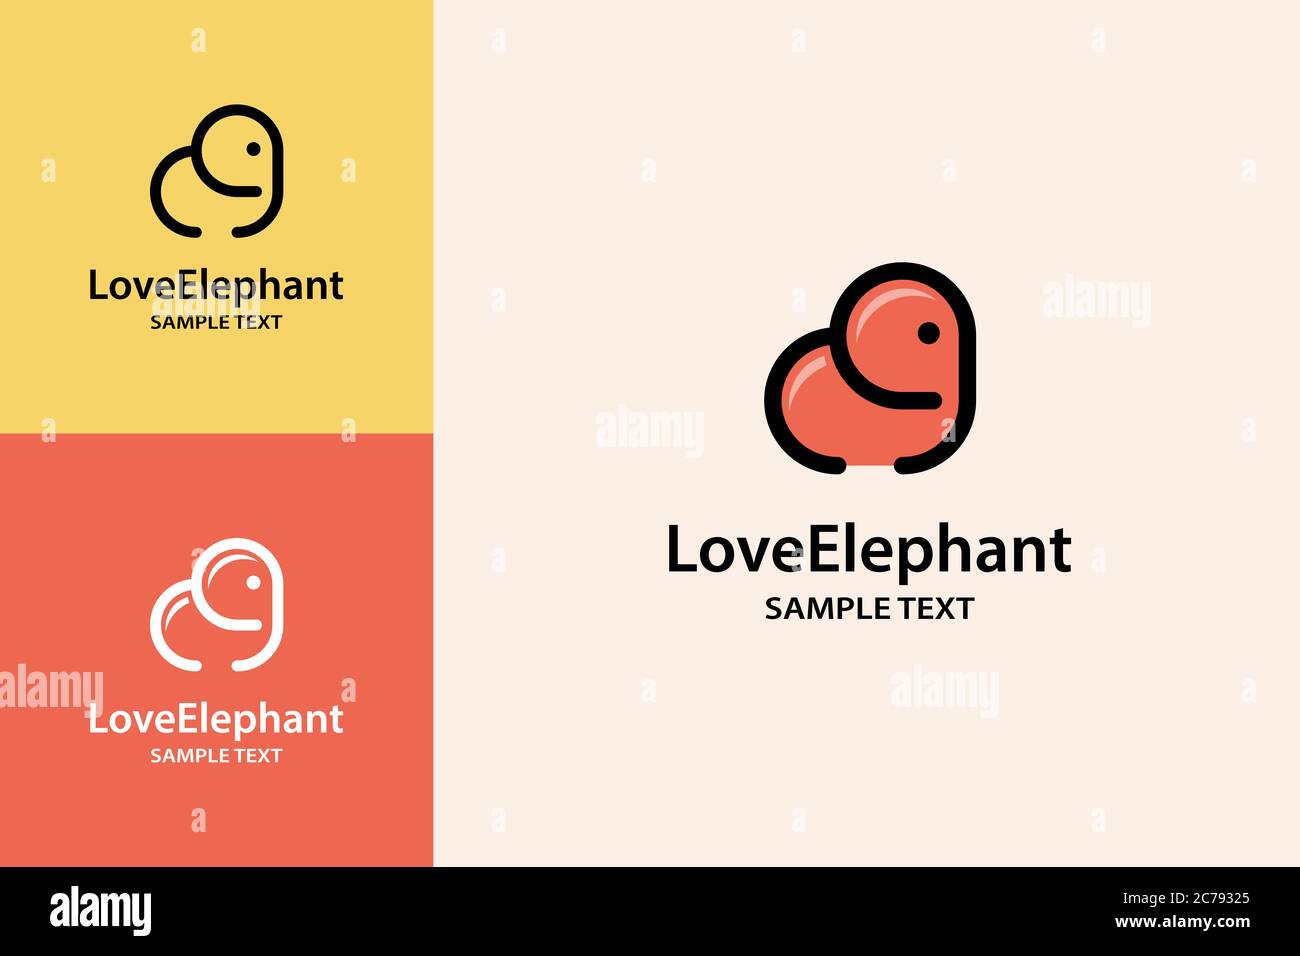 Love Elephant Logo, Linear Design Concept, Cute And Simple Icon. Stock Vector